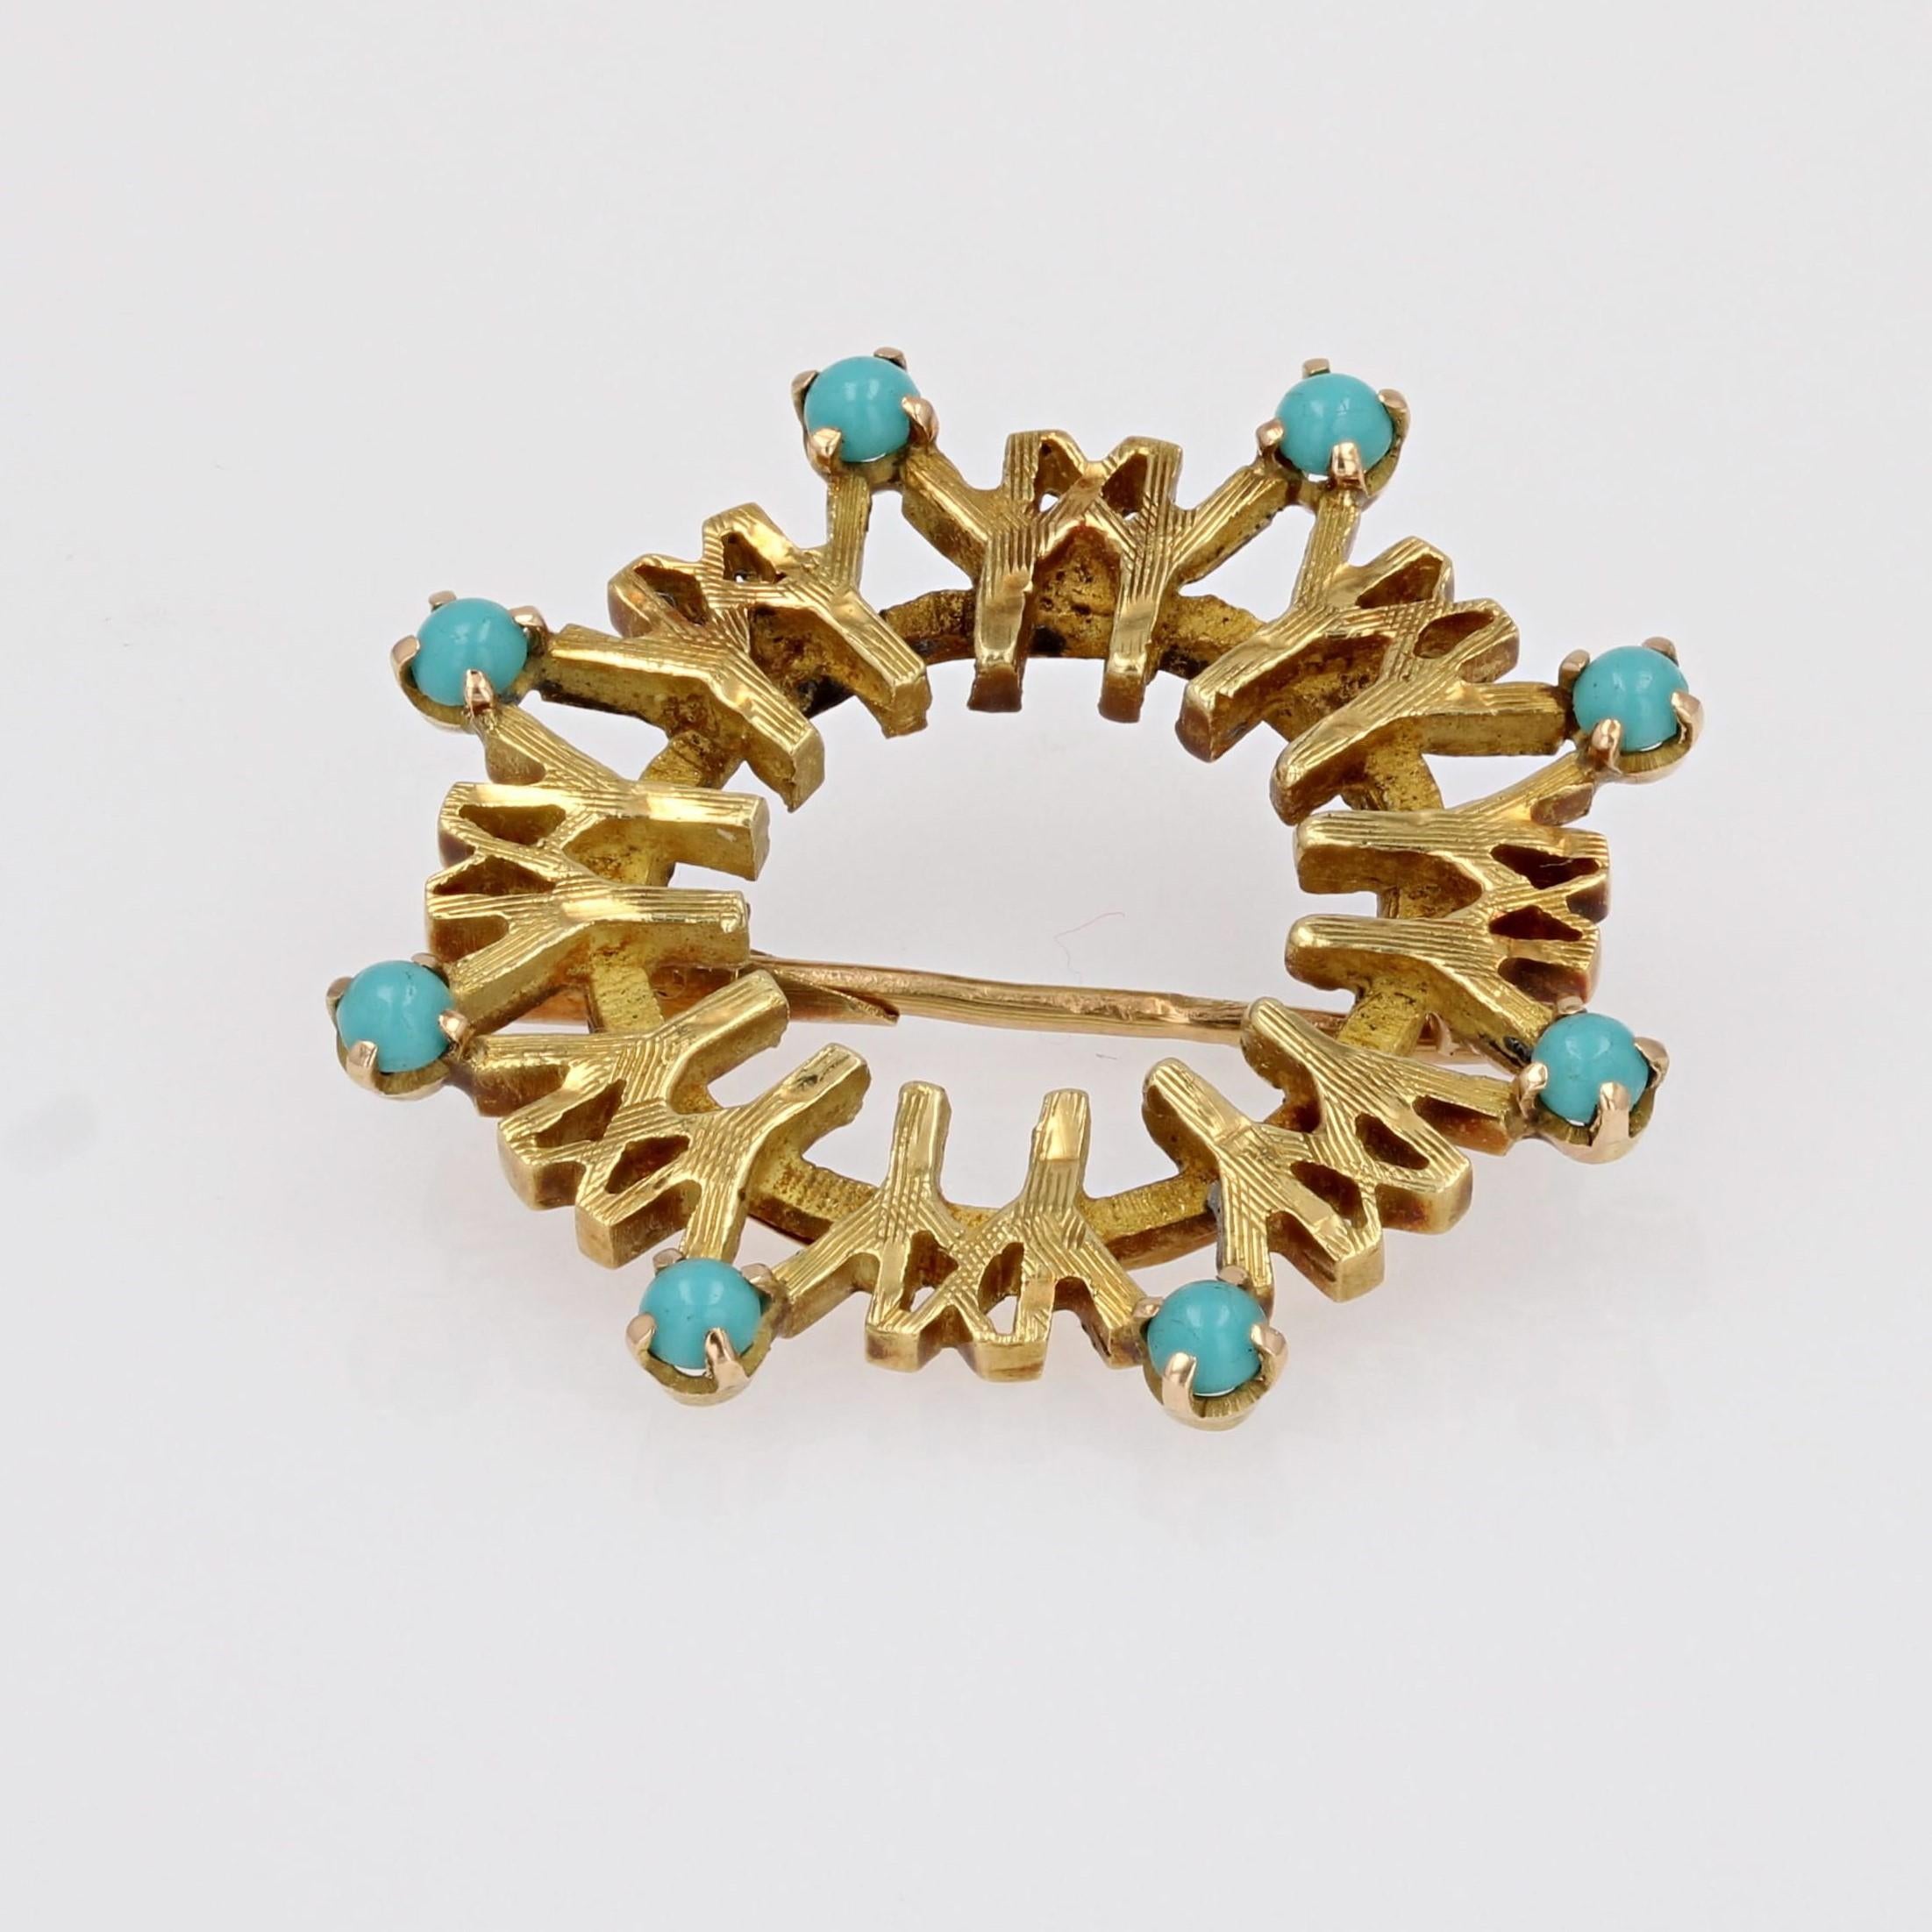 Modernist 1967 Montreal Universal Exhibition Turquoise Gold Brooch